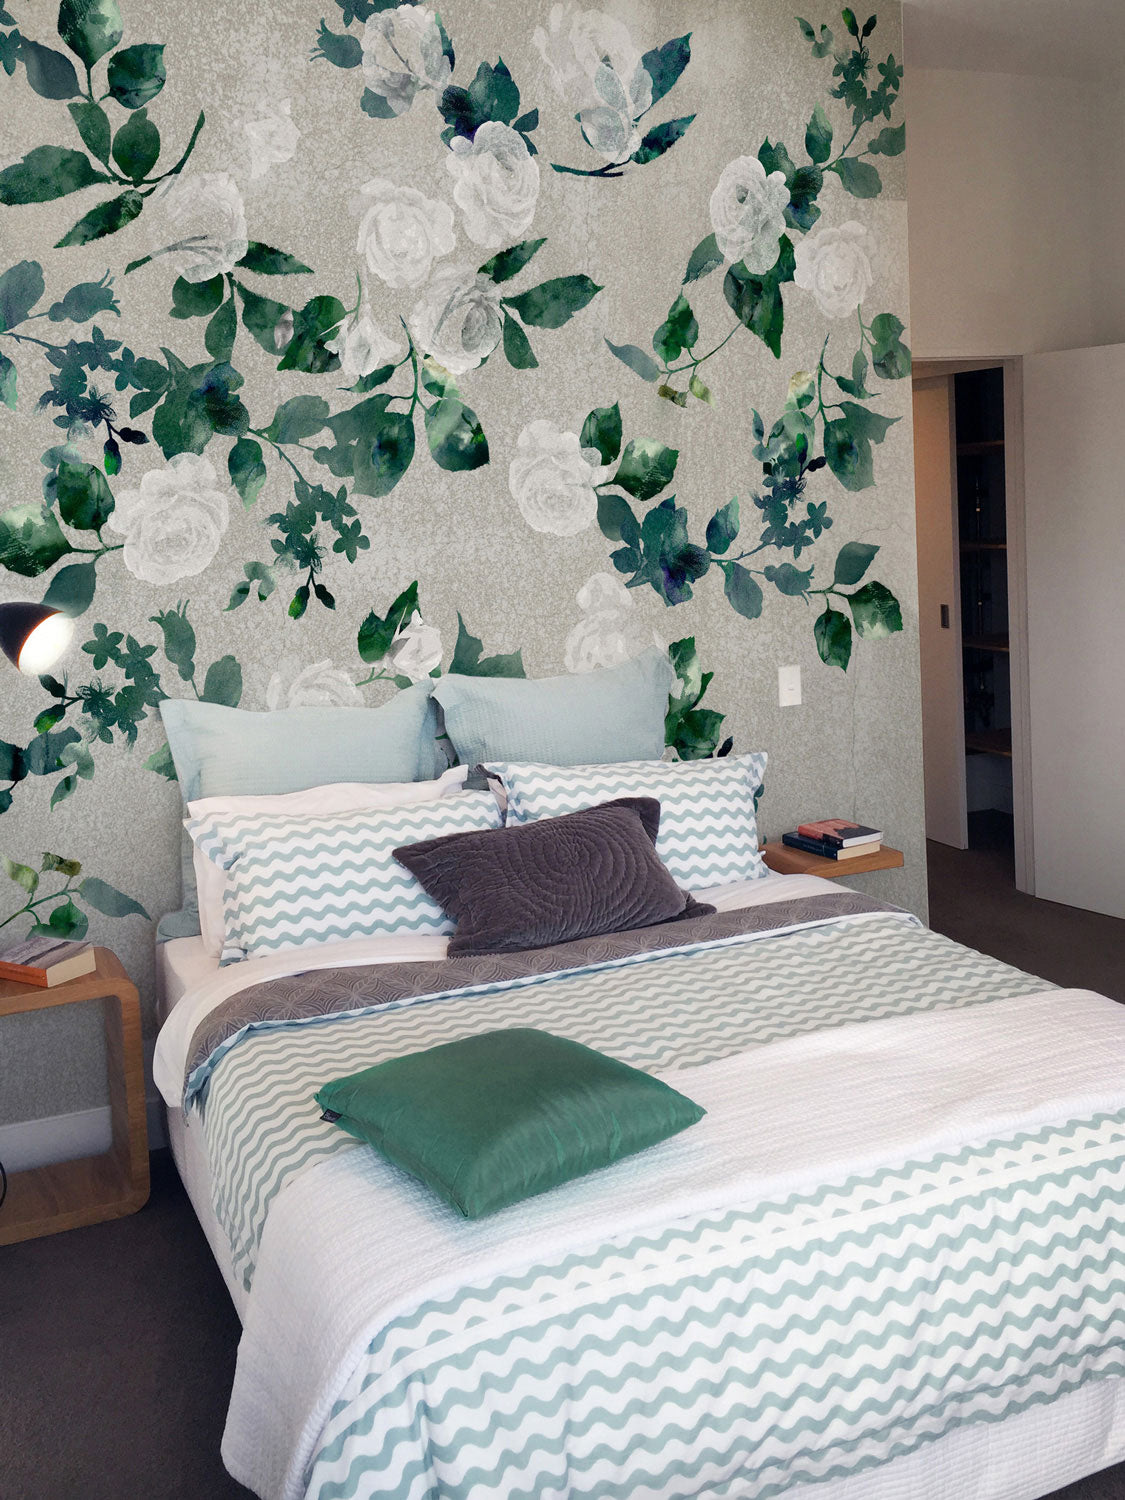 Rambling Rose Wall Mural by Back to the Wall